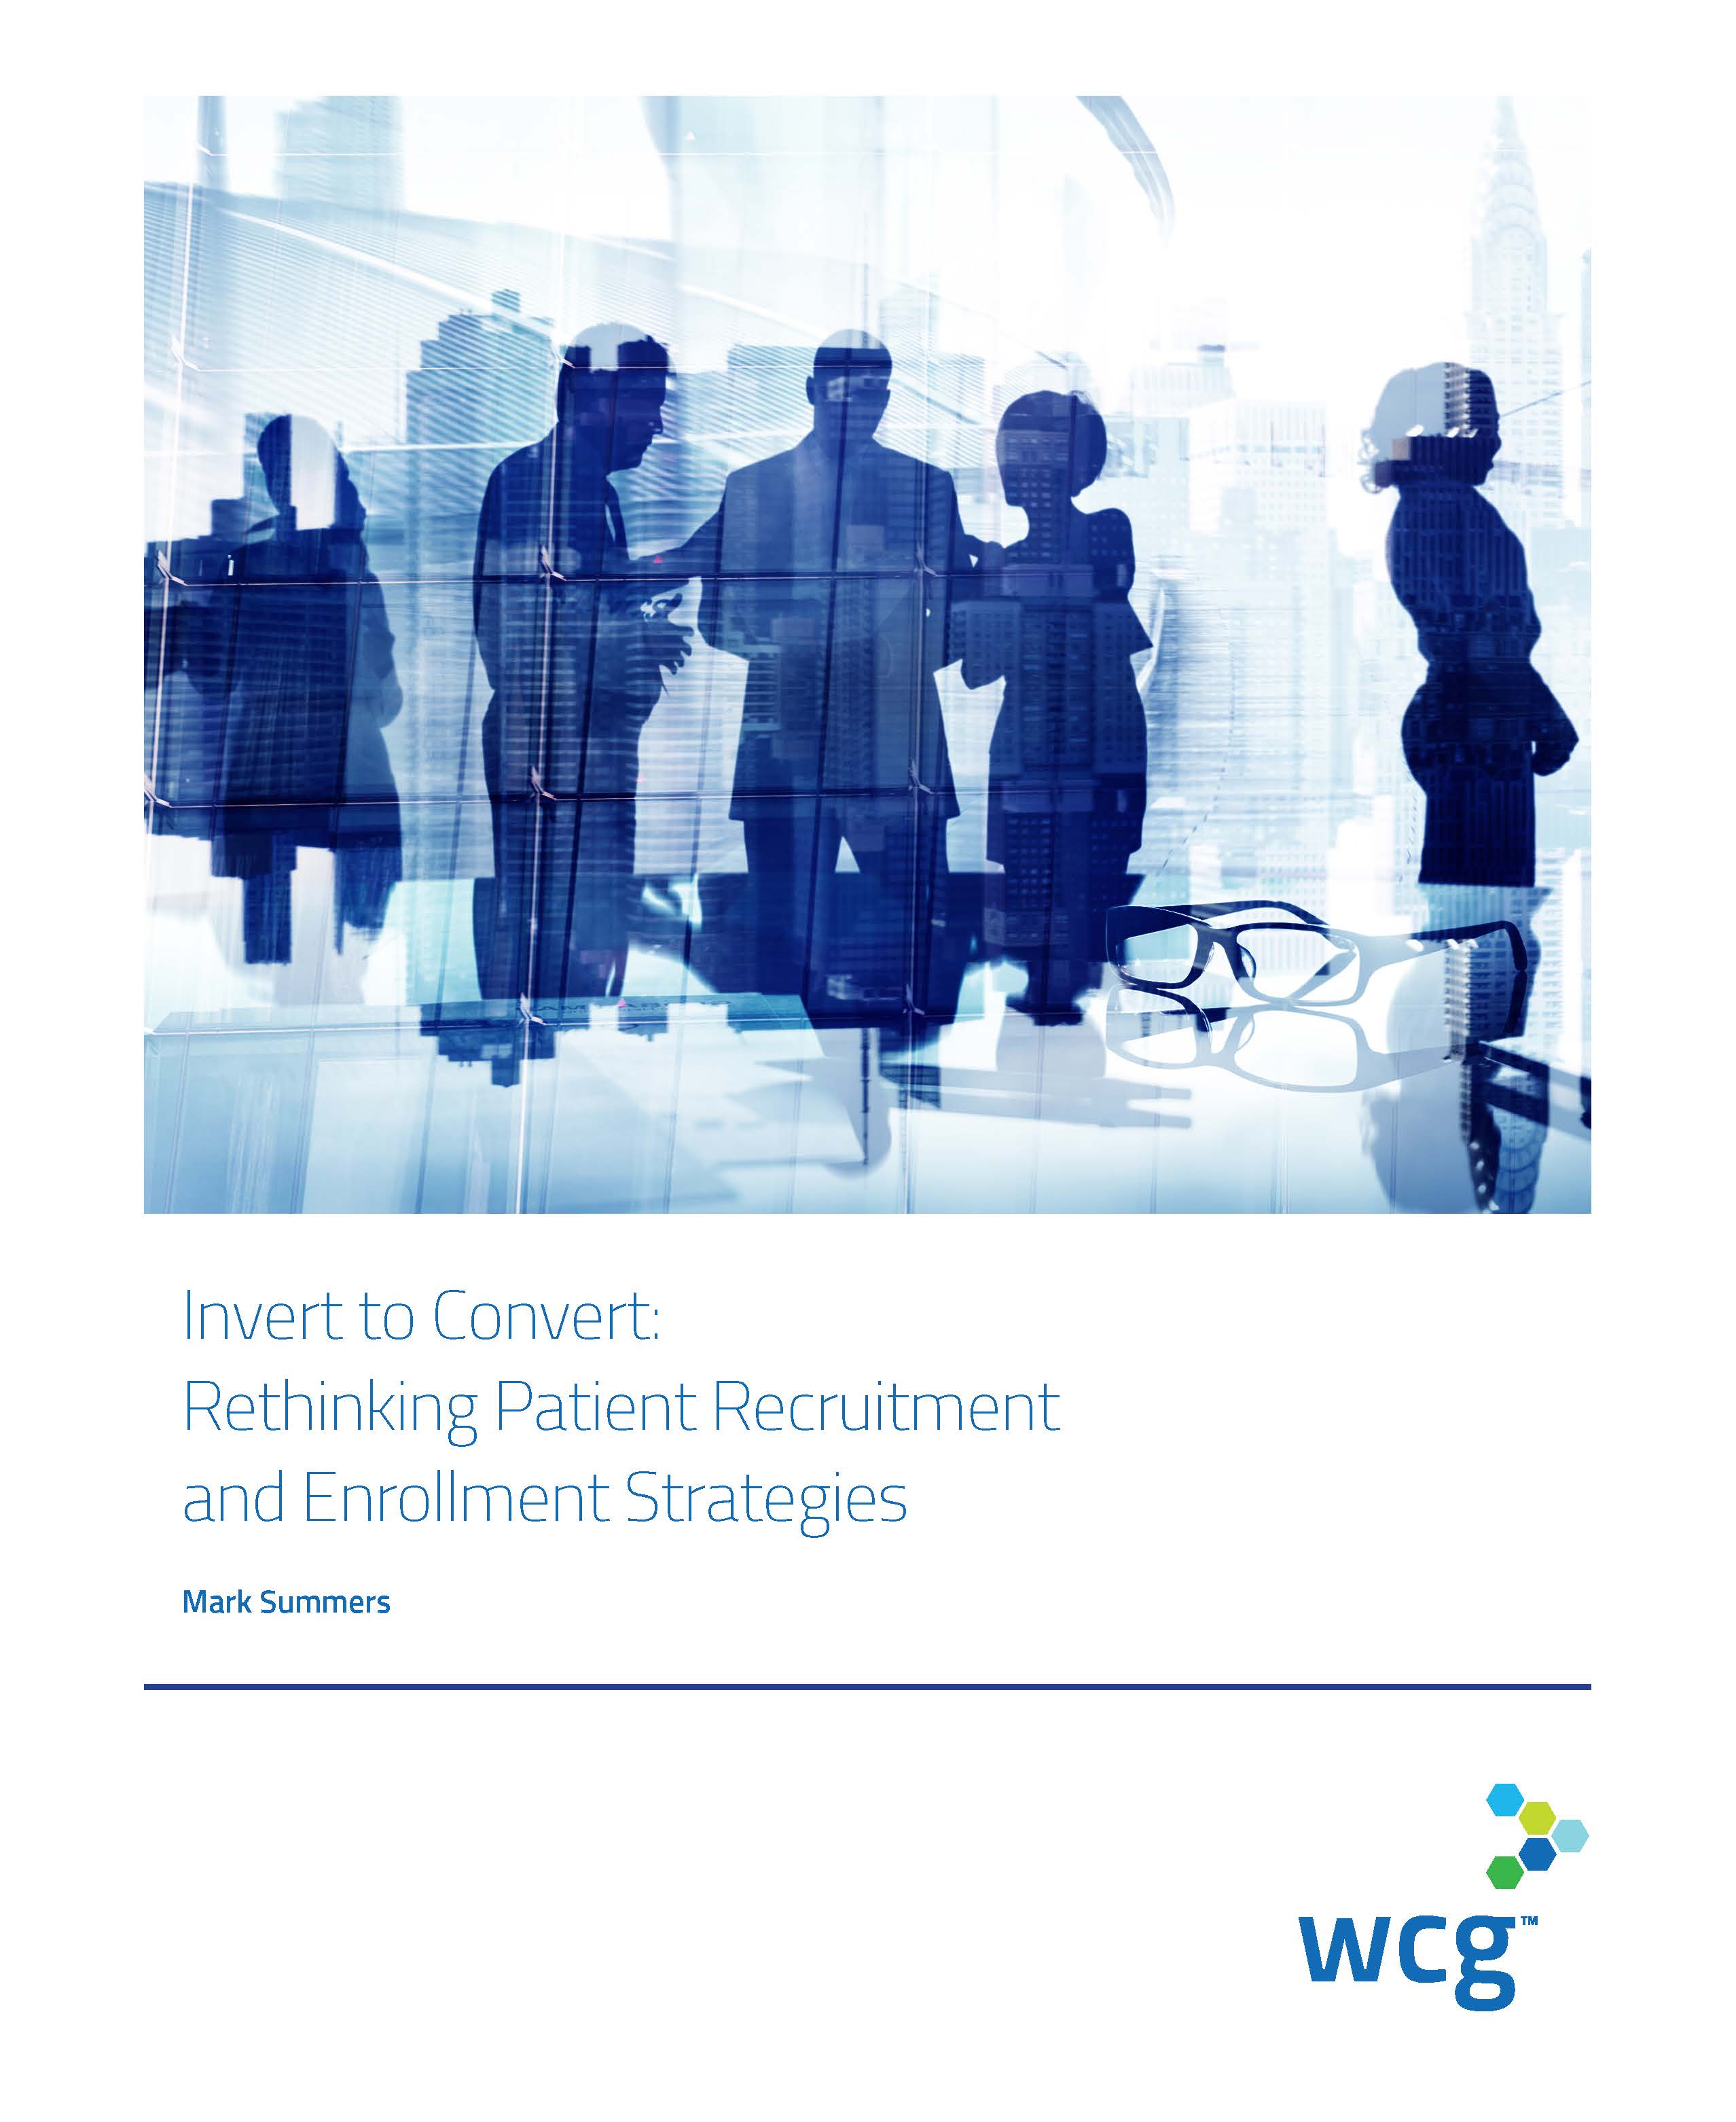 Invert to Convert: Rethinking Patient Recruitment and Enrollment Strategies